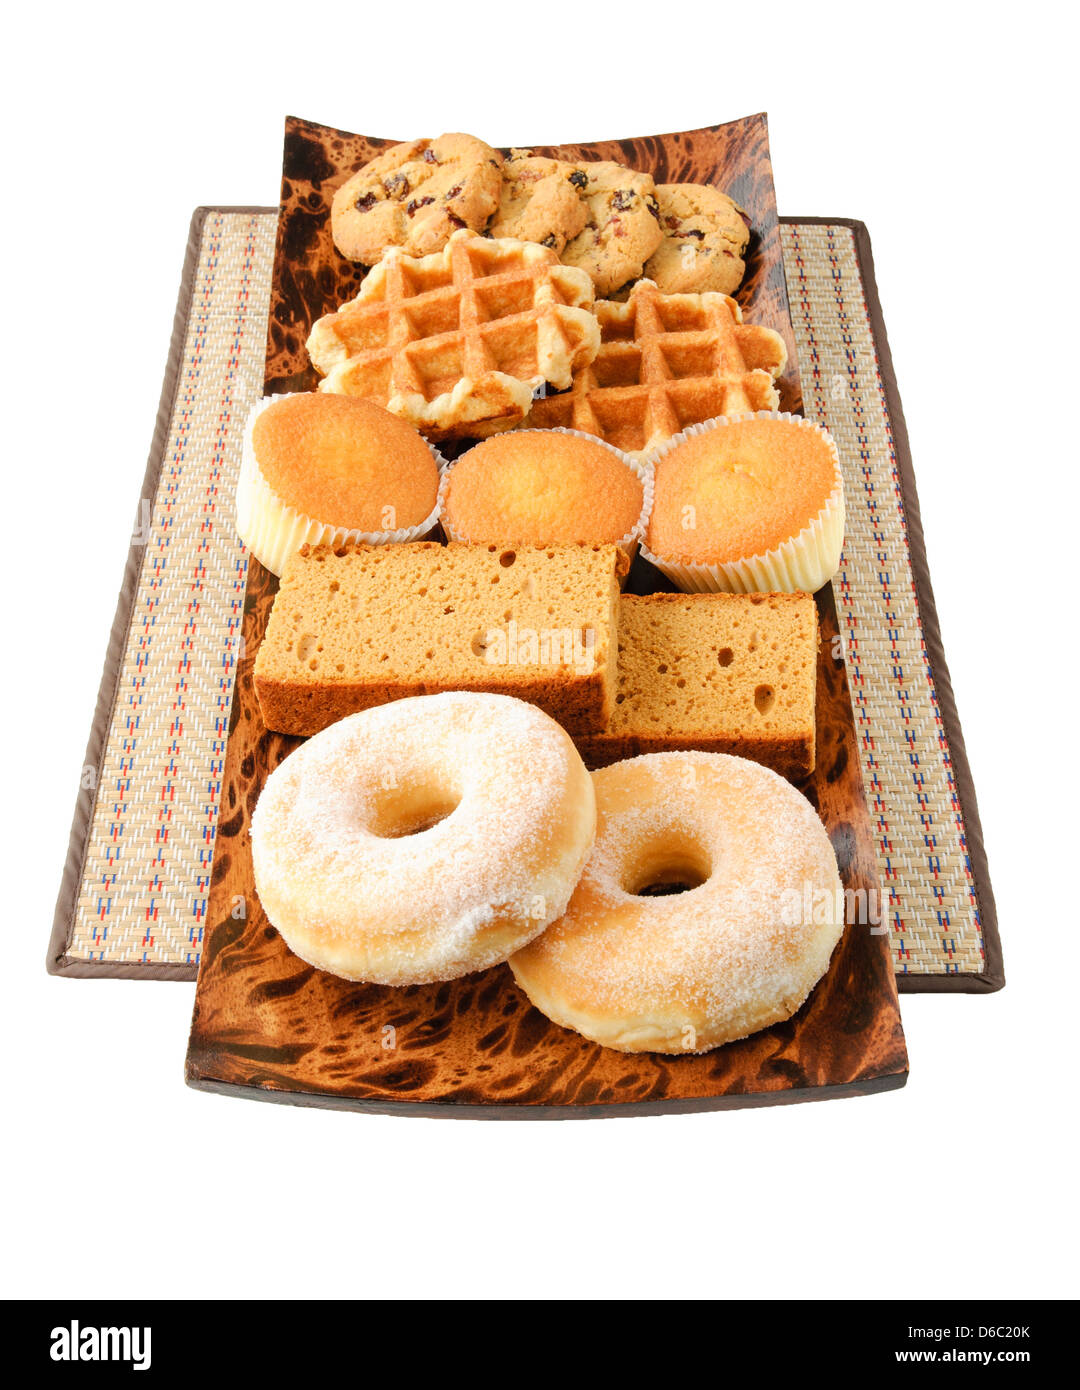 Cakes, cookies, donuts and waffles on the wooden plate Stock Photo